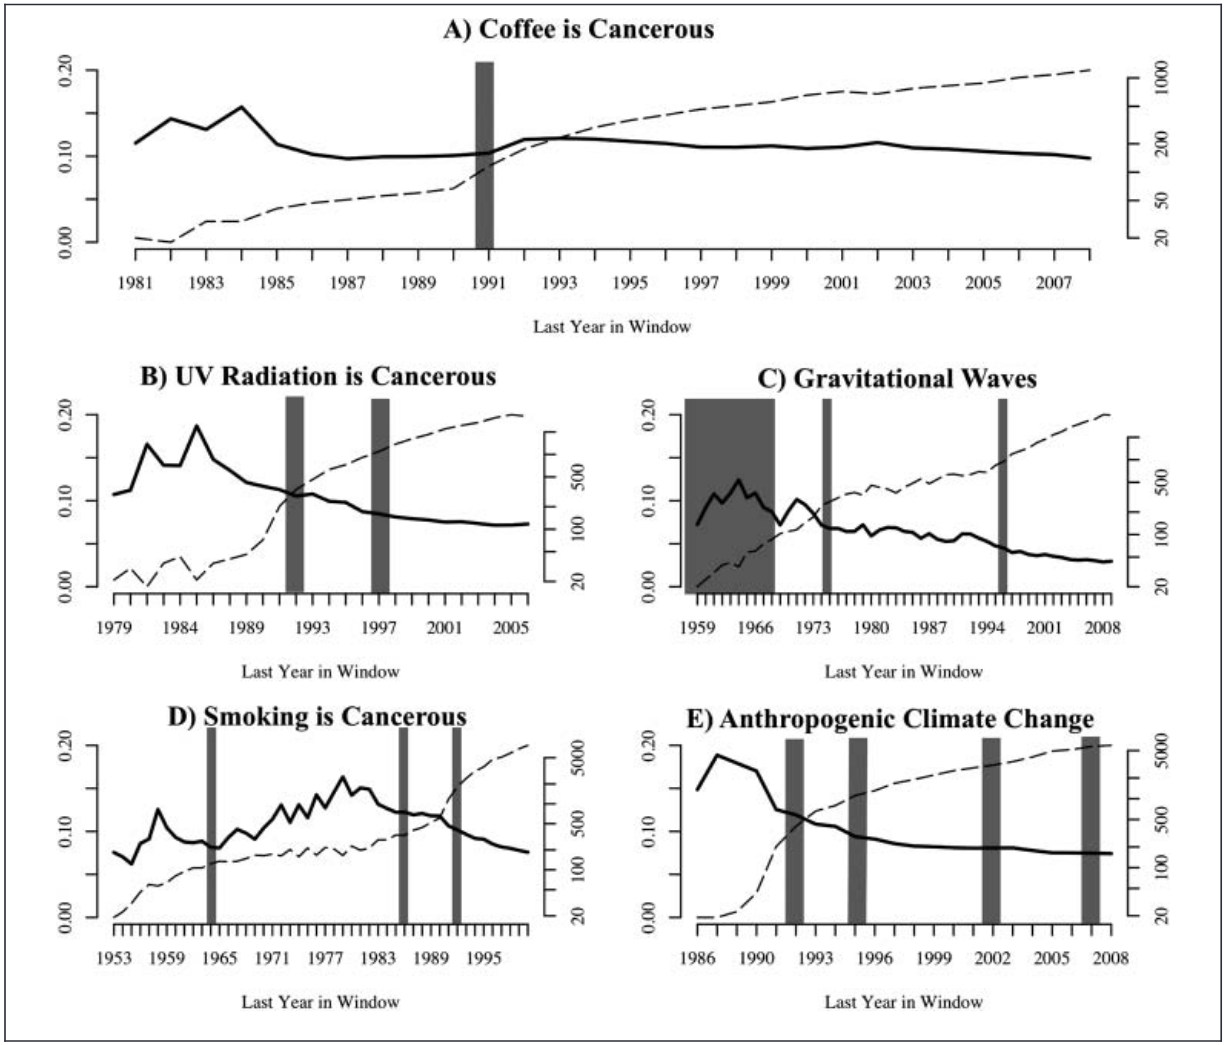 Scientific figure with five panels. Each shows a time-series line chart and labeled with a contentious scientific claim: A) Coffee is Cancerous; B) UV Radiation is cancerous; C) Gravitational waves; D) Smoking is cancerous; E) Anthropogenic Climate Change